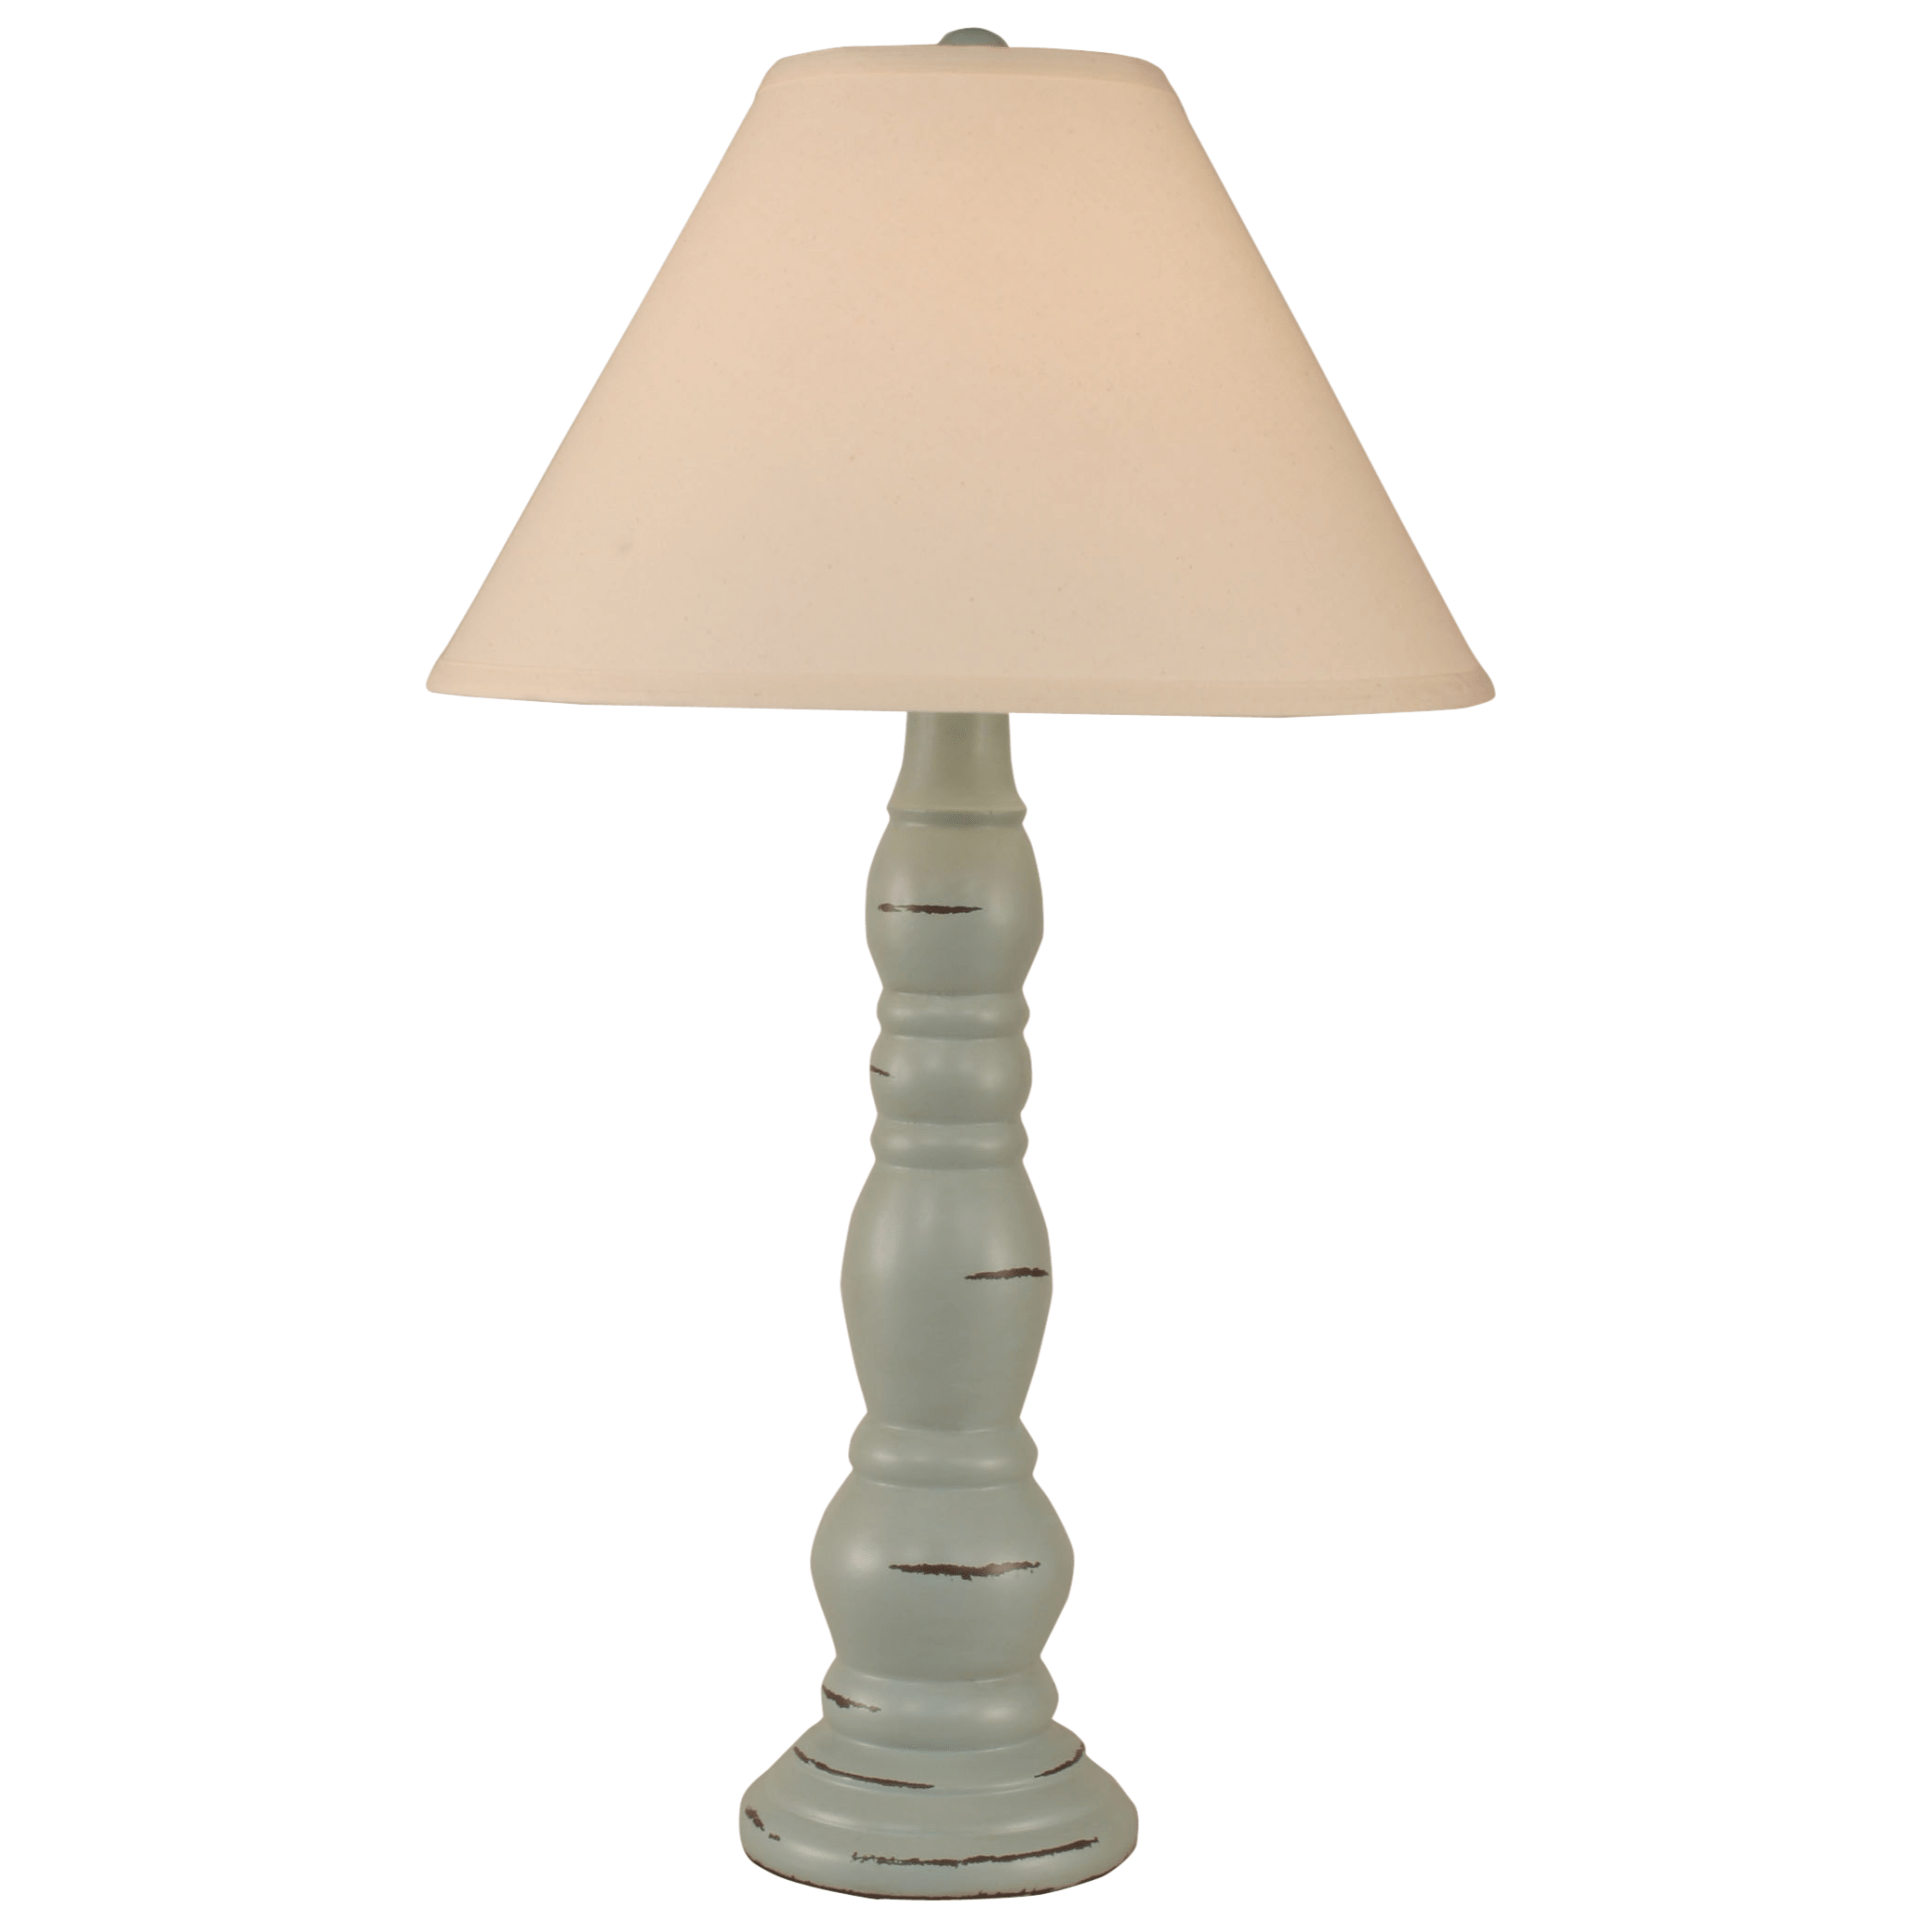 Ringed Candlestick Table Lamp